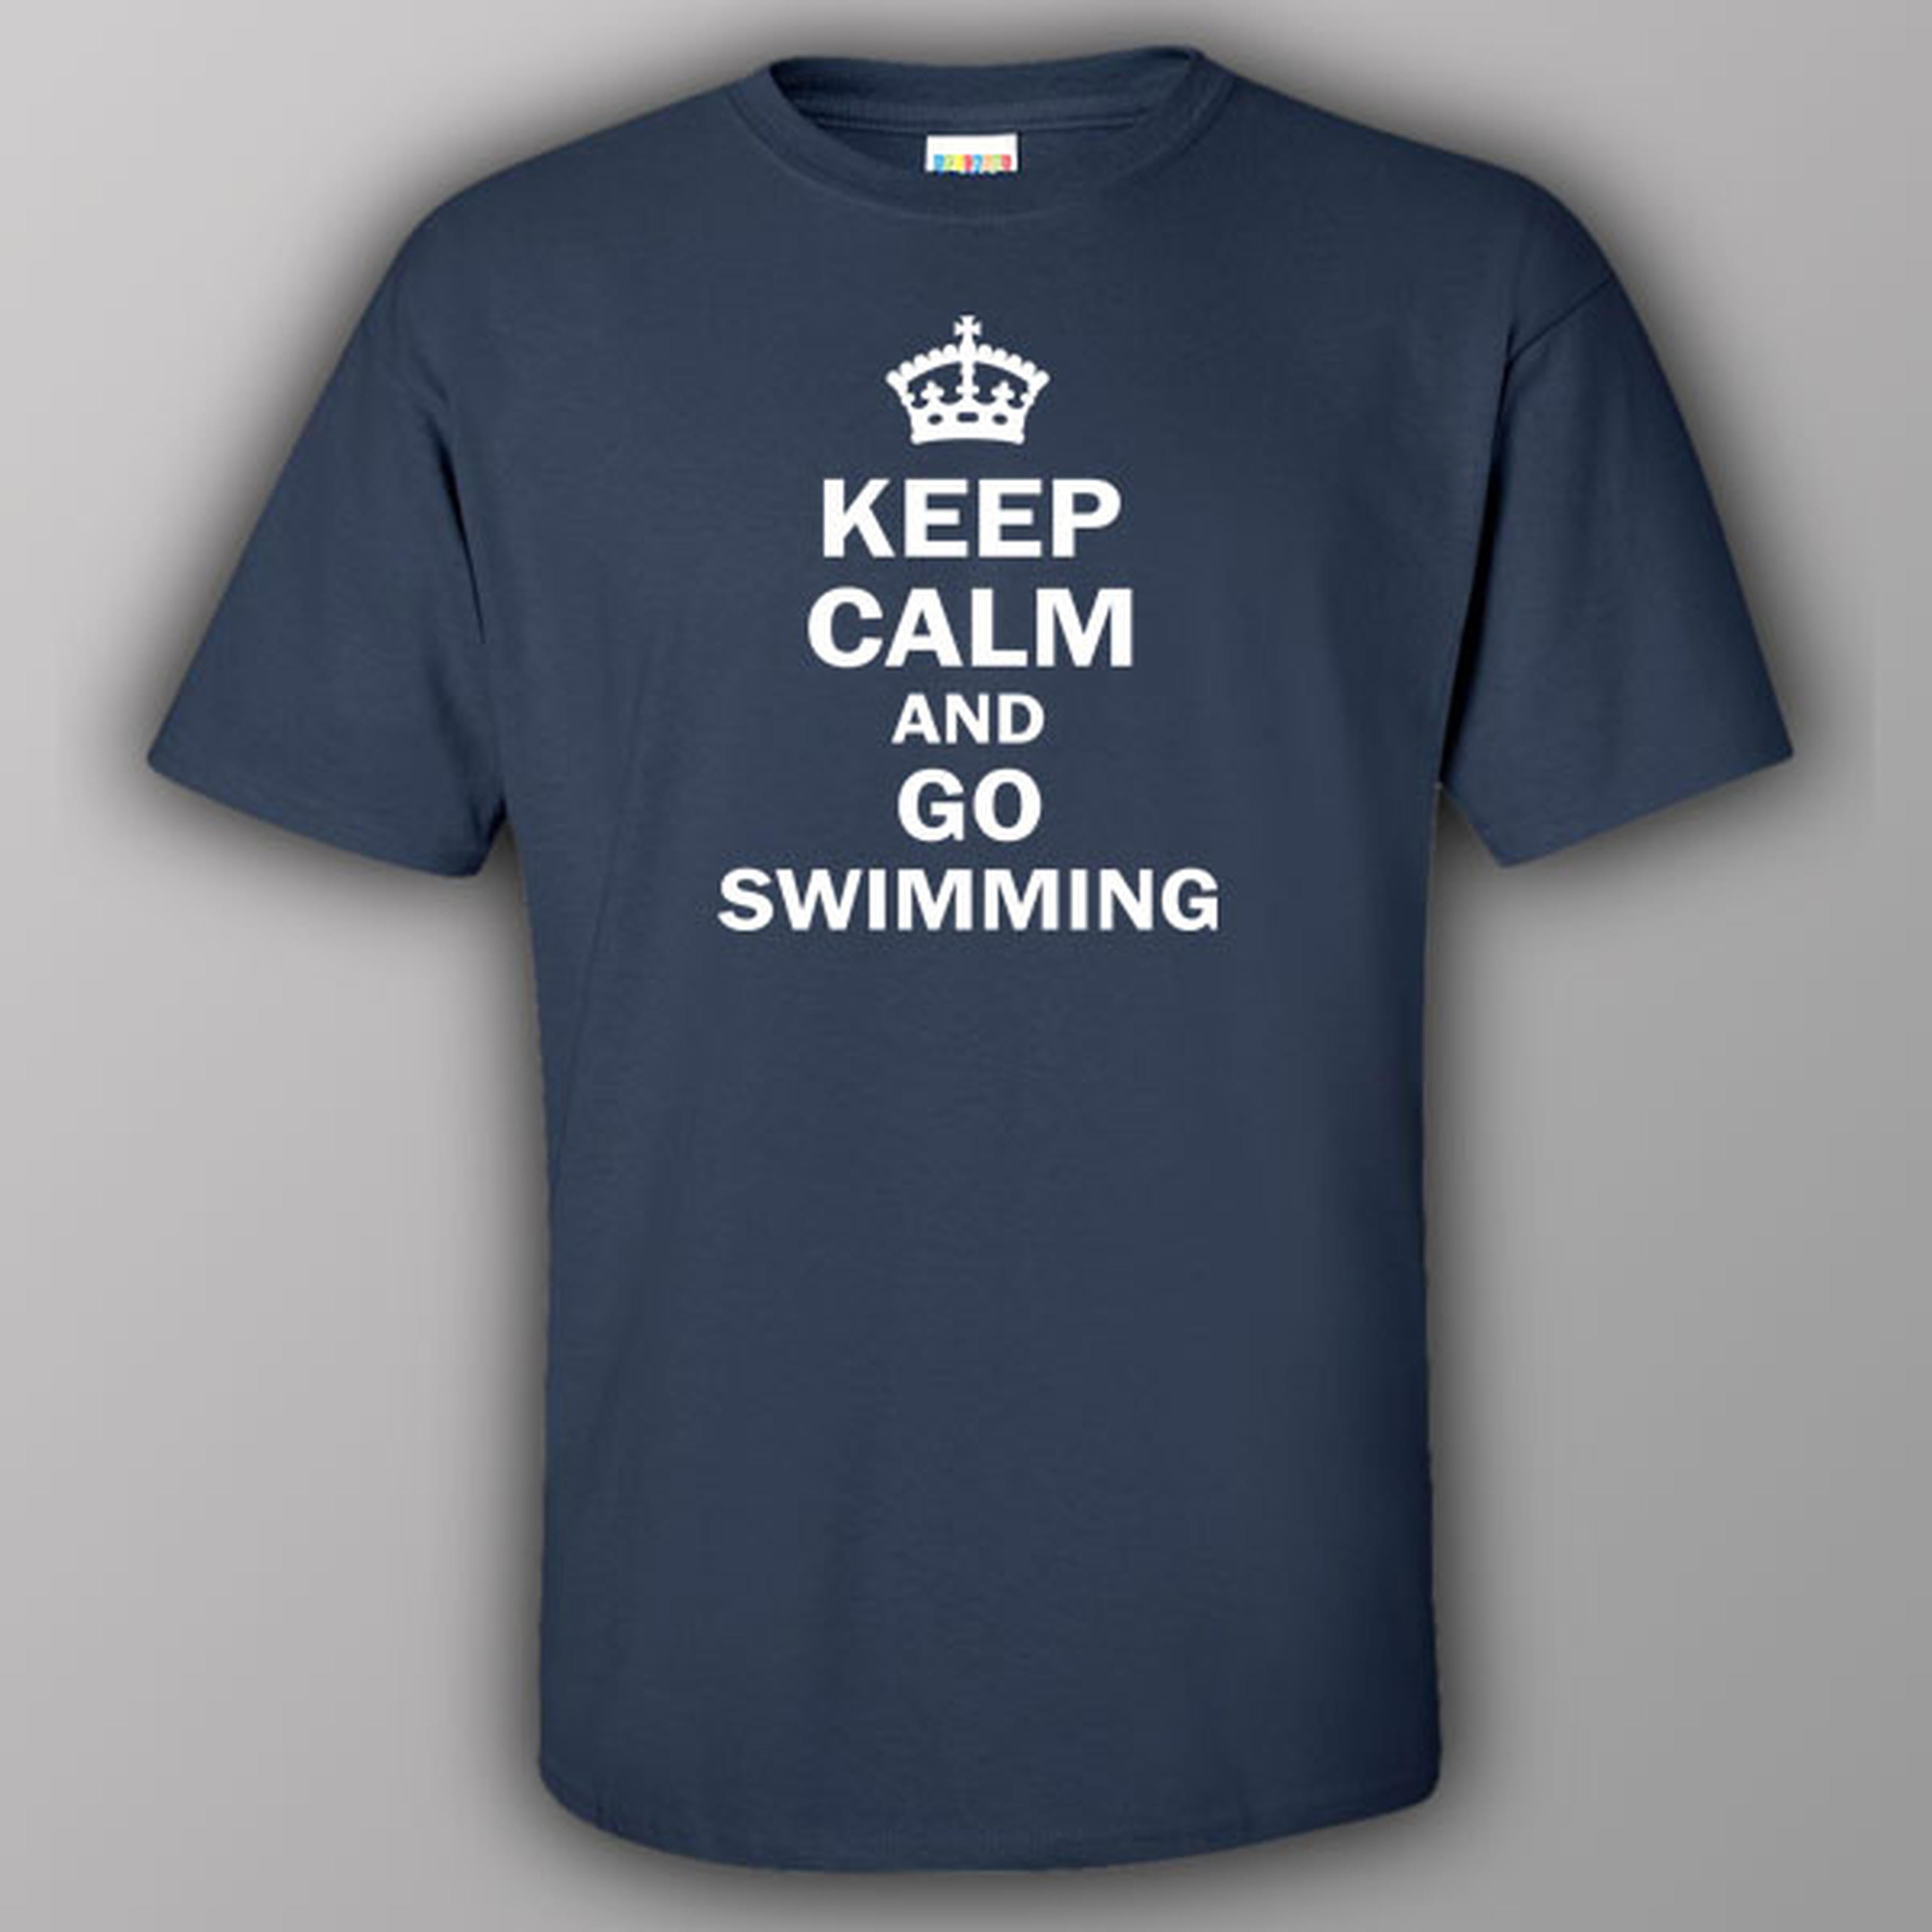 Keep calm and go swimming - T-shirt